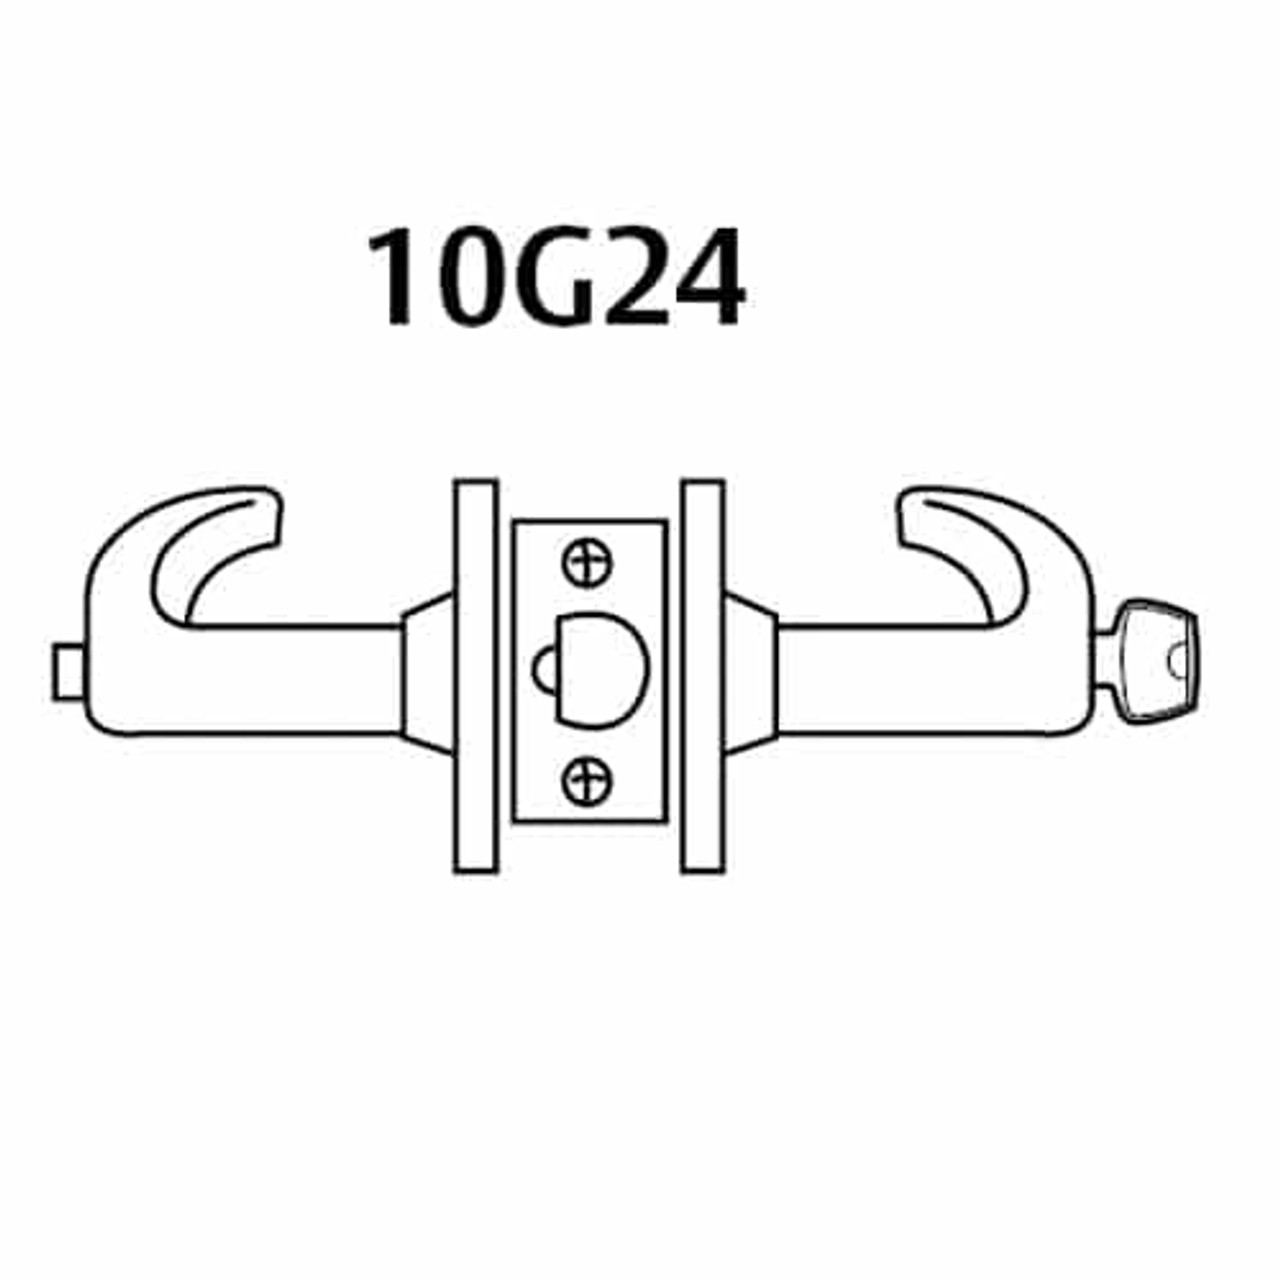 2870-10G24-GB-10 Sargent 10 Line Cylindrical Entry Locks with B Lever Design and G Rose Prepped for SFIC in Dull Bronze